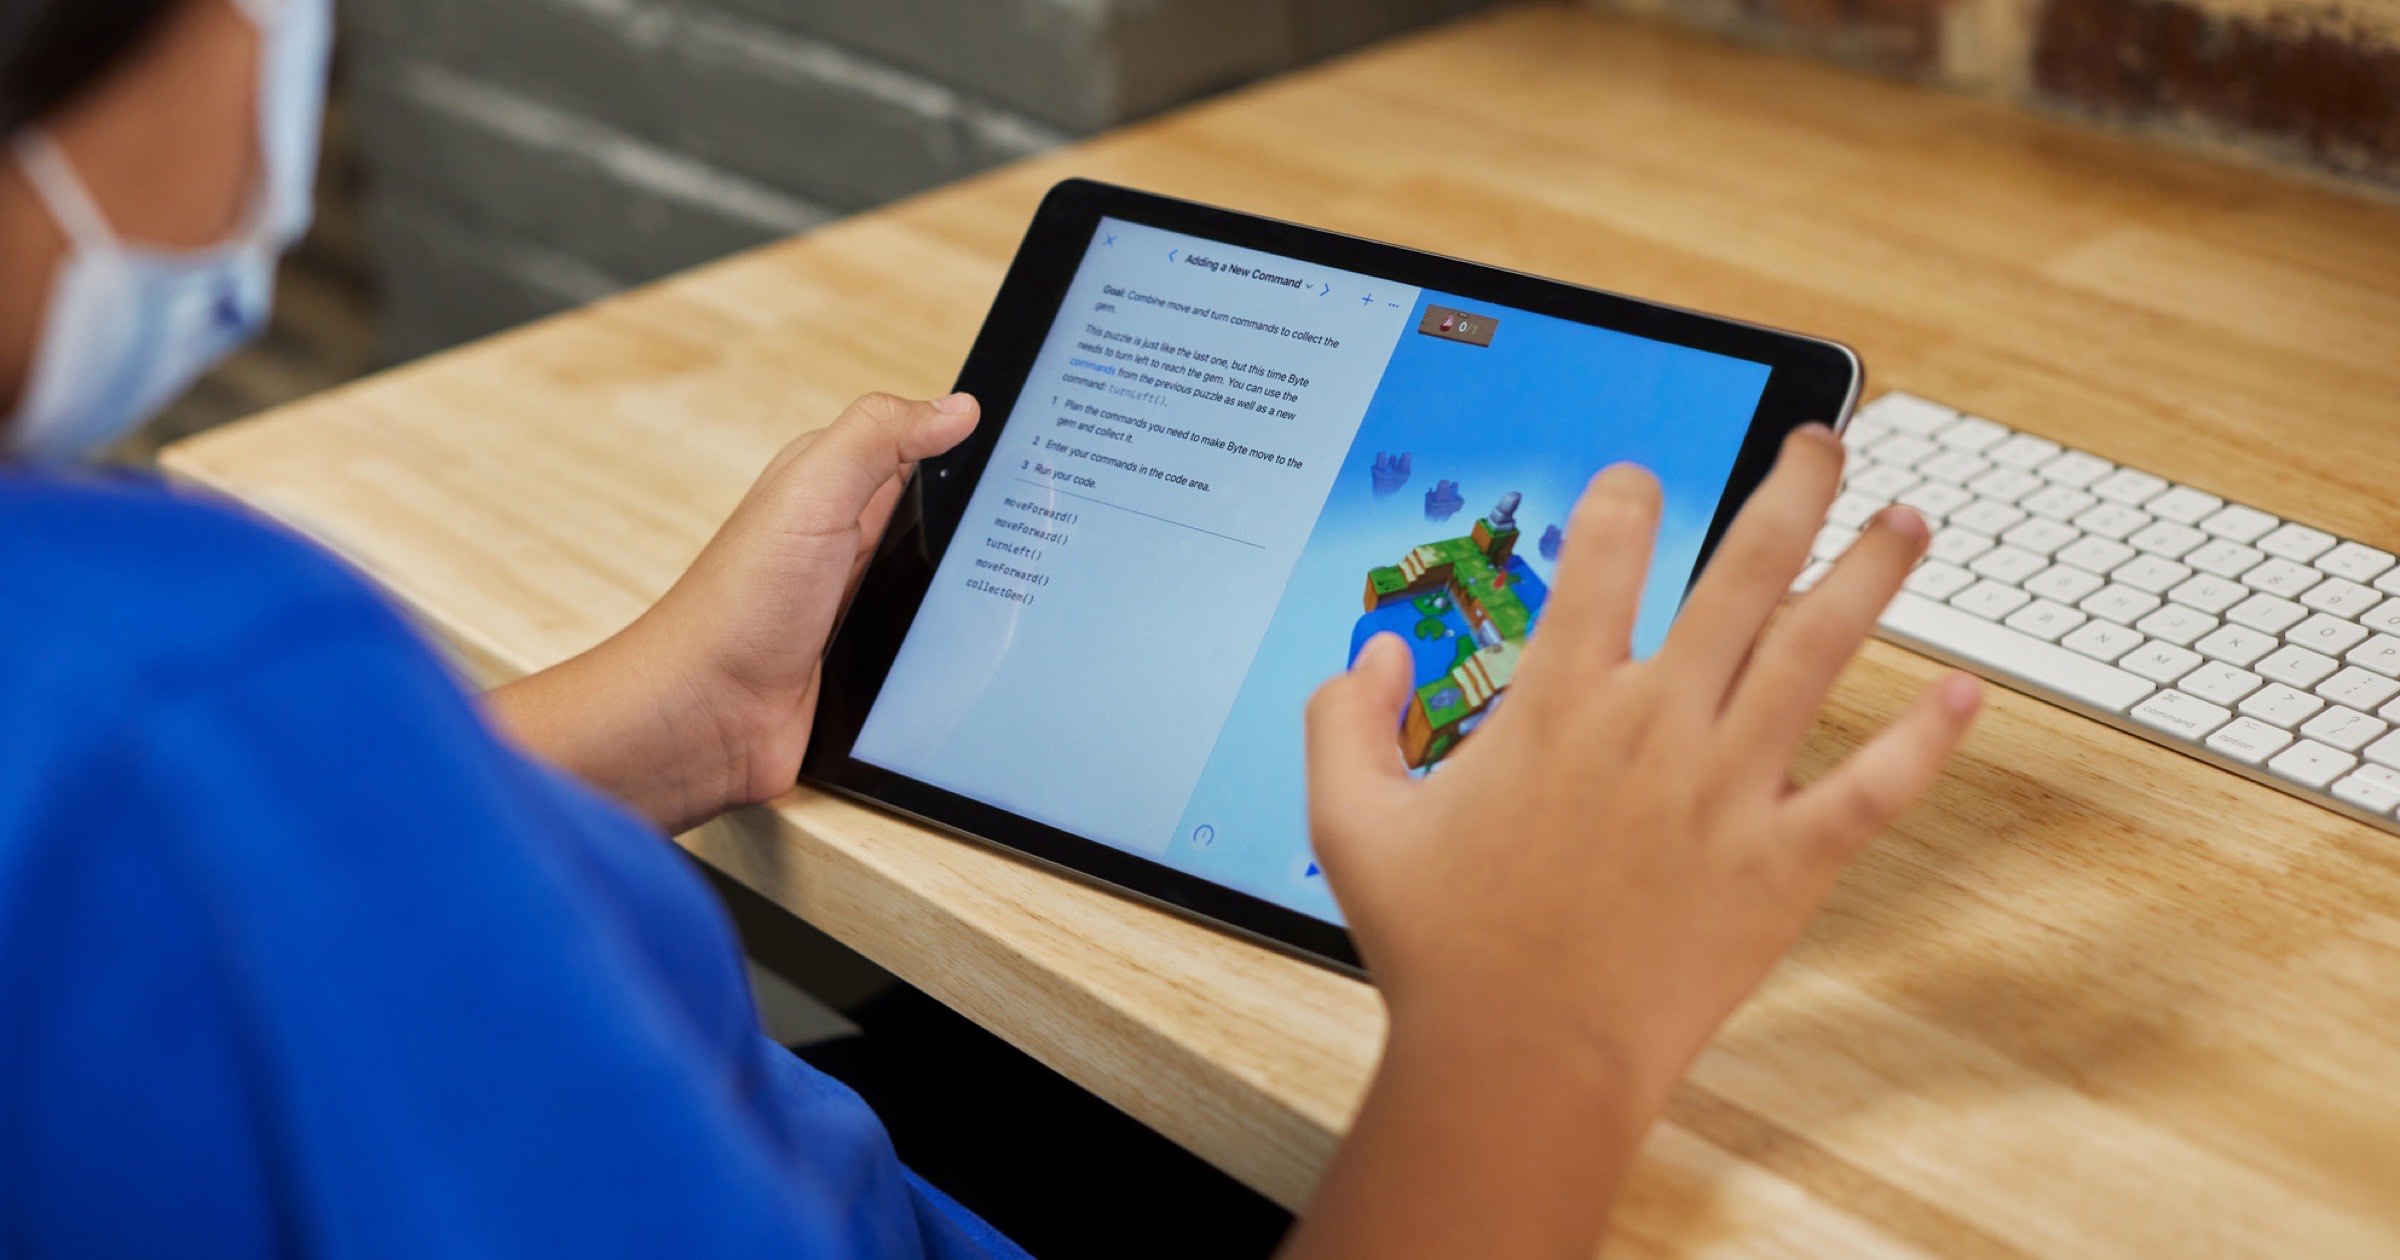 Kid using an iPad to play with Apple’s swift playgrounds app.